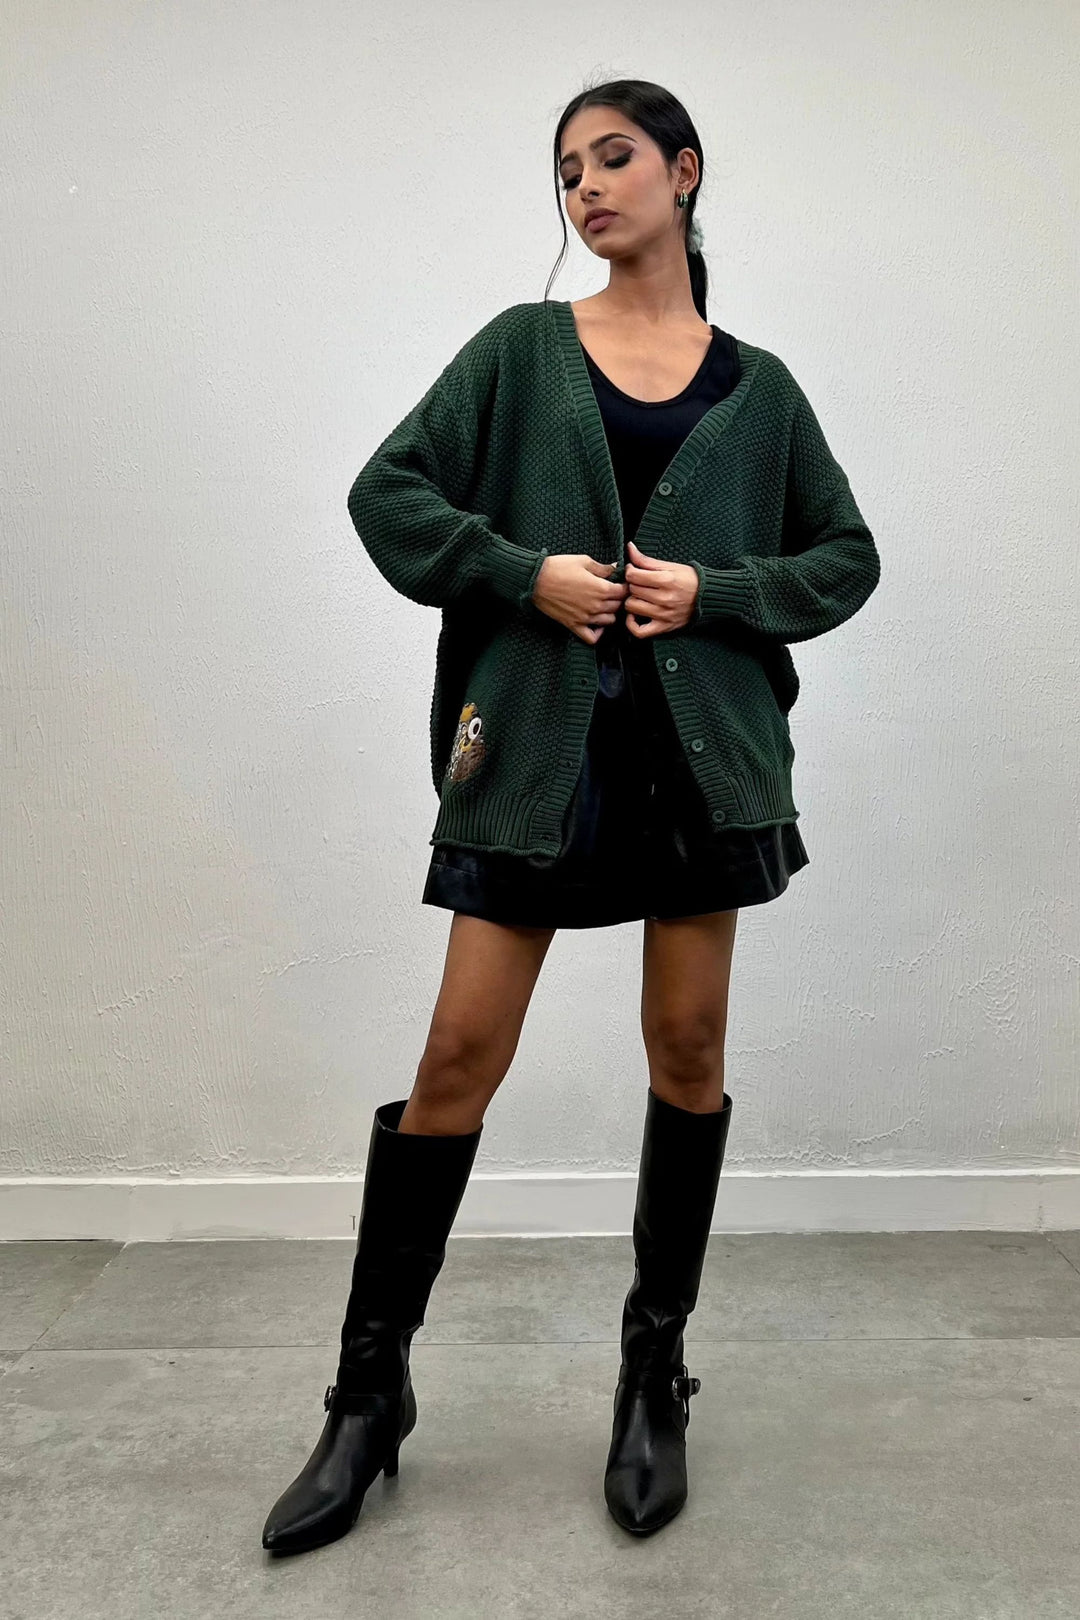 Stylish buttoned cardigan in dark green color